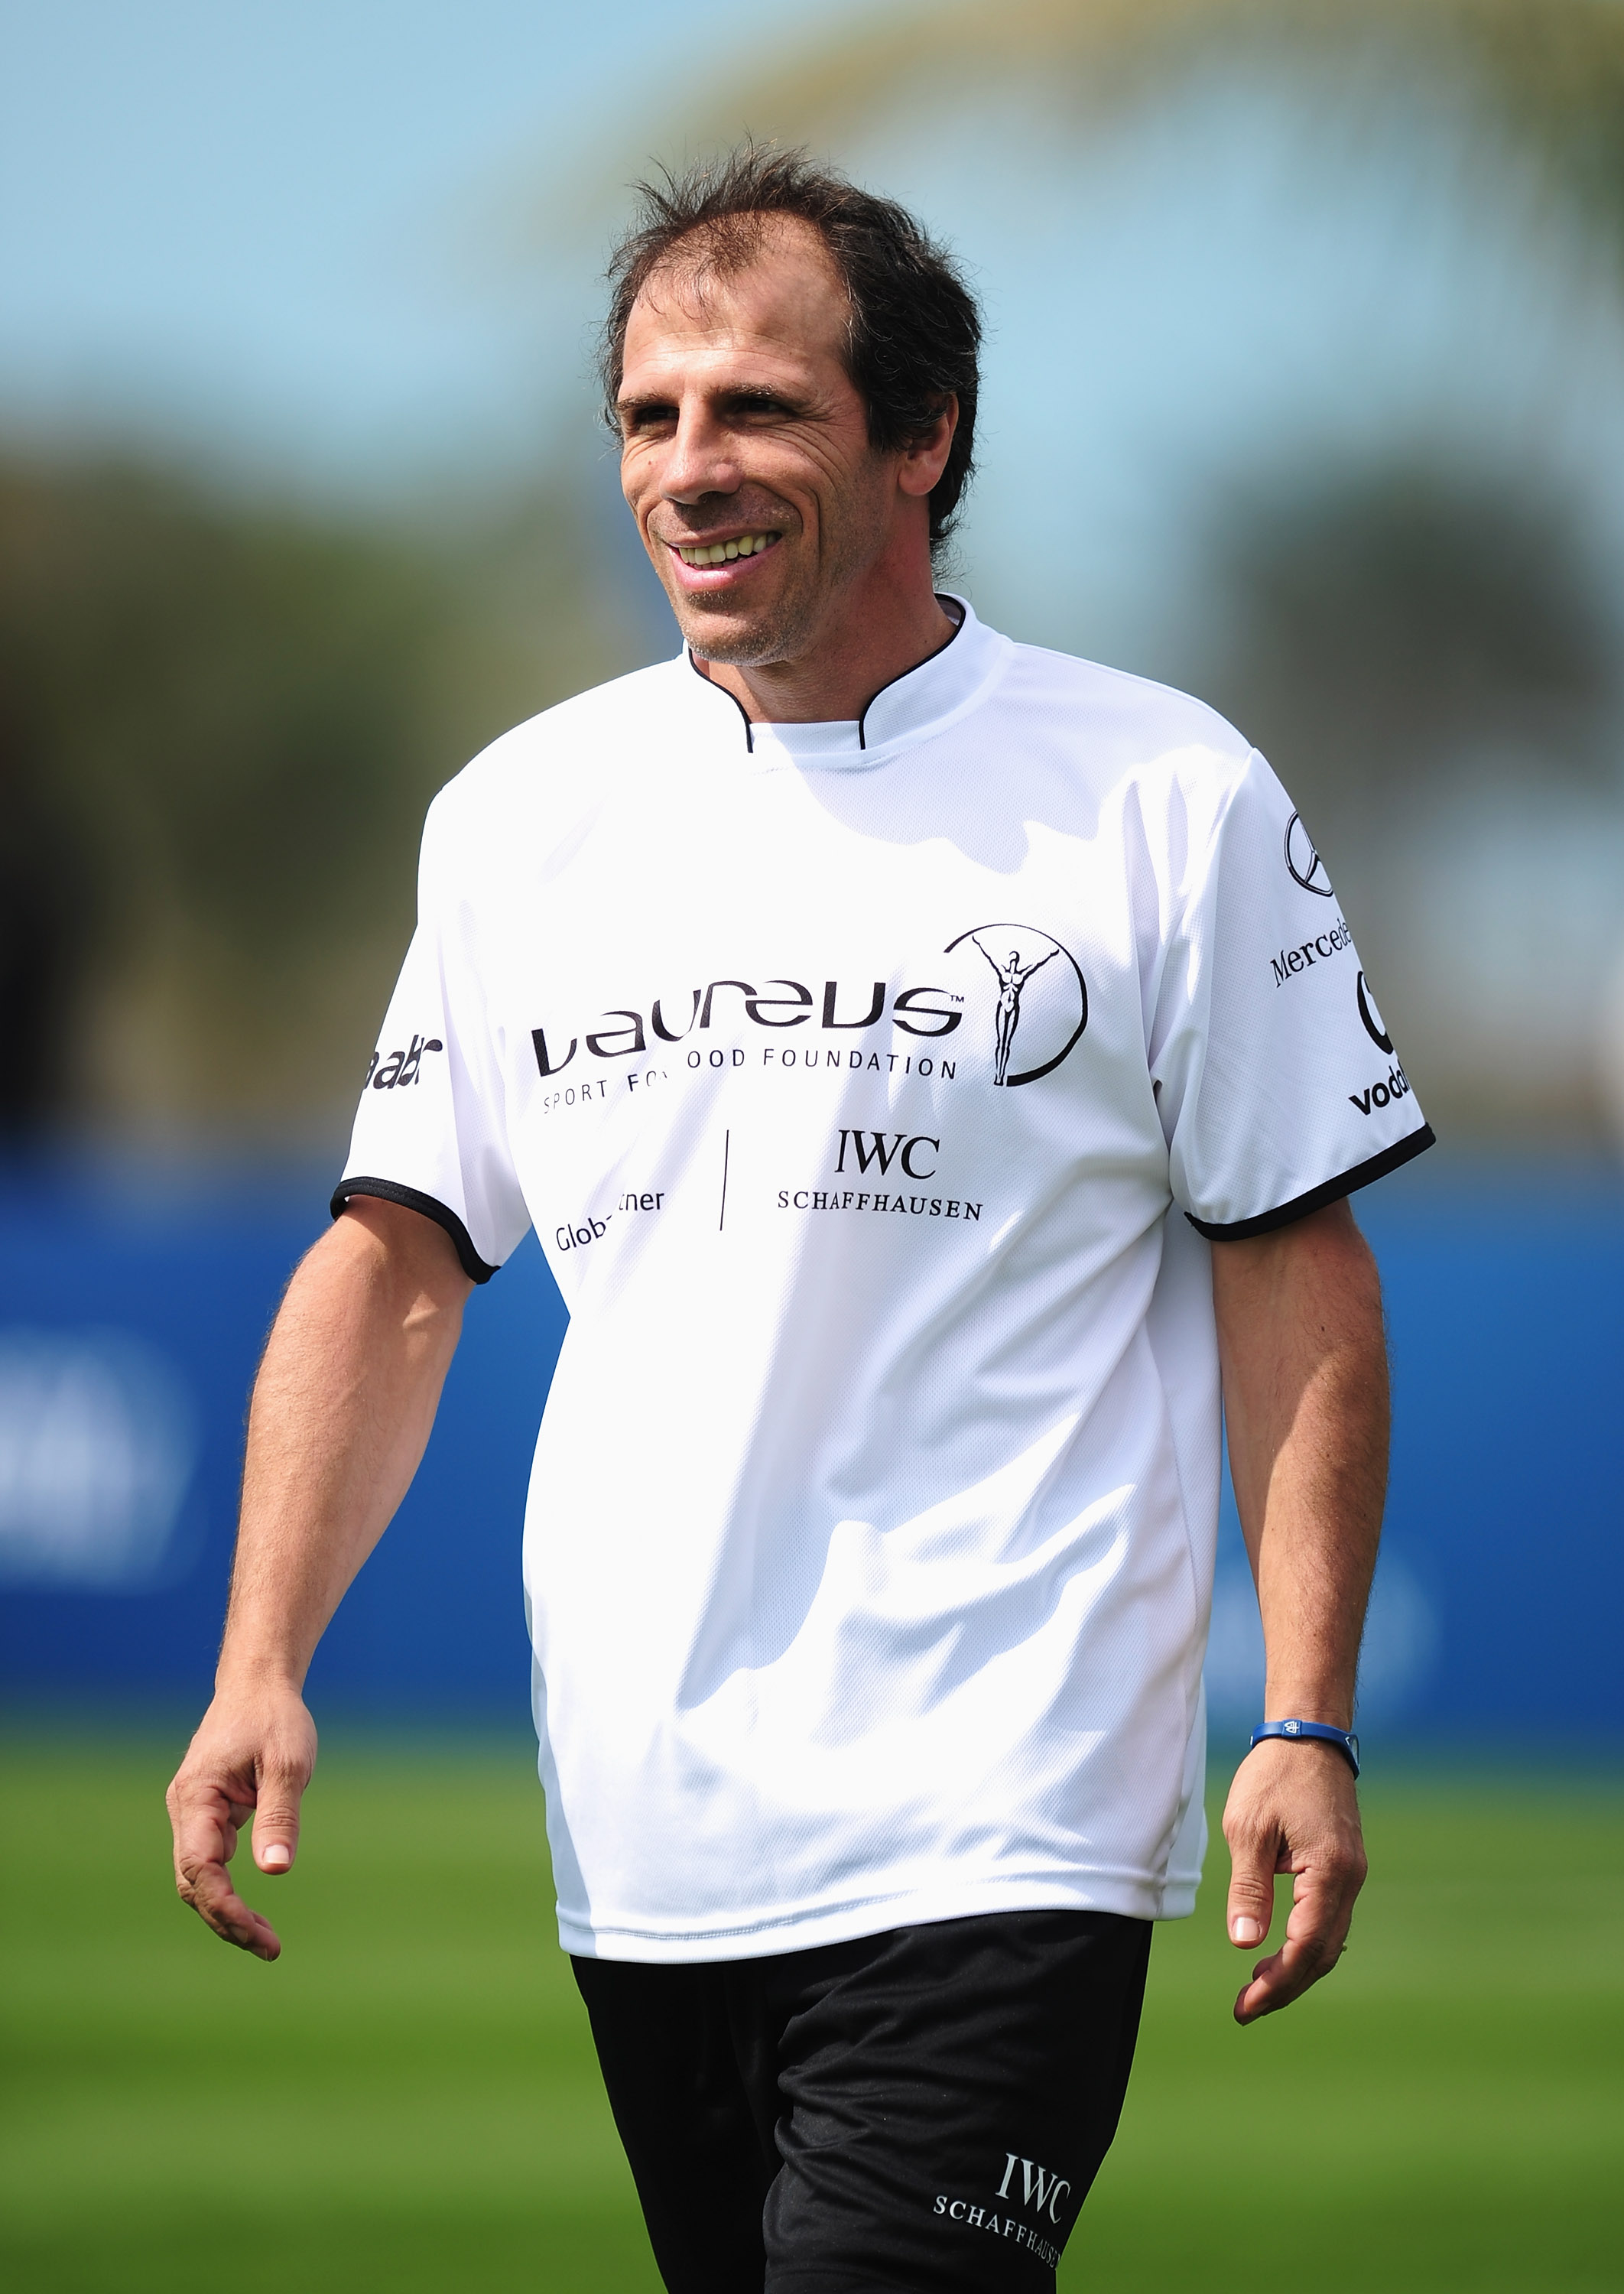 ABU DHABI, UNITED ARAB EMIRATES - FEBRUARY 07: Gianfranco Zola during the Laureus Football Challenge presented by IWC Schaffhausen as part of the 2011 Laureus World Sports Awards at the Emirates Palace on February 7, 2011 in Abu Dhabi, United Arab Emirate